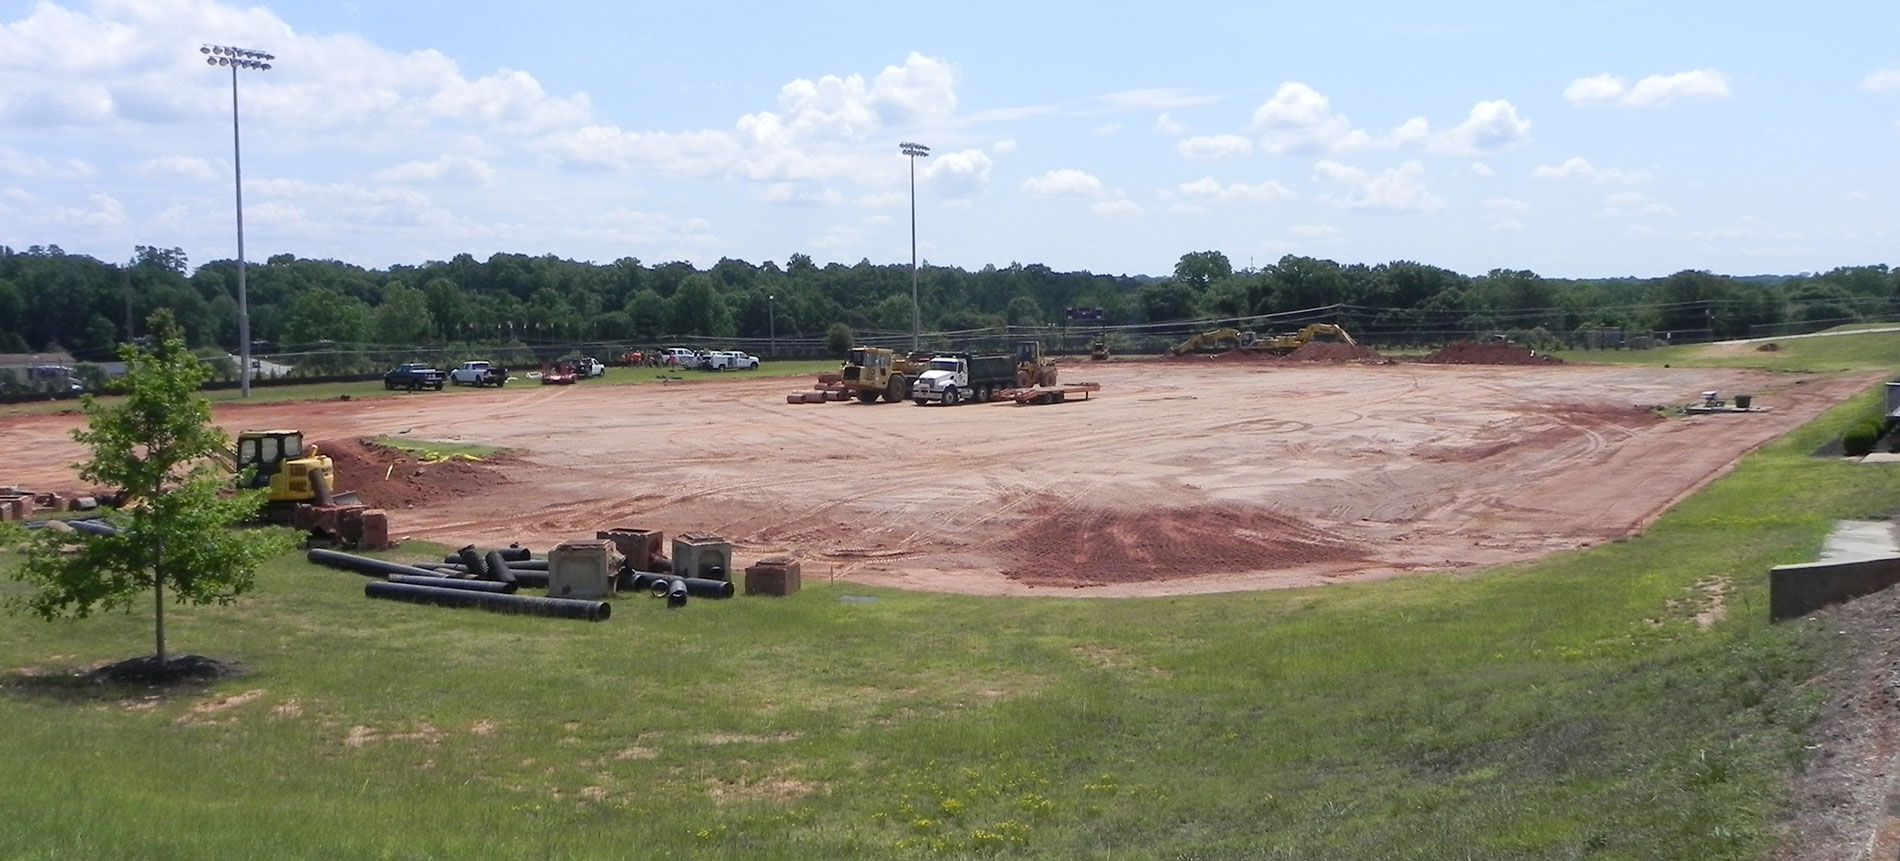 Extensive Soccer Complex Renovations Underway  at Anderson University